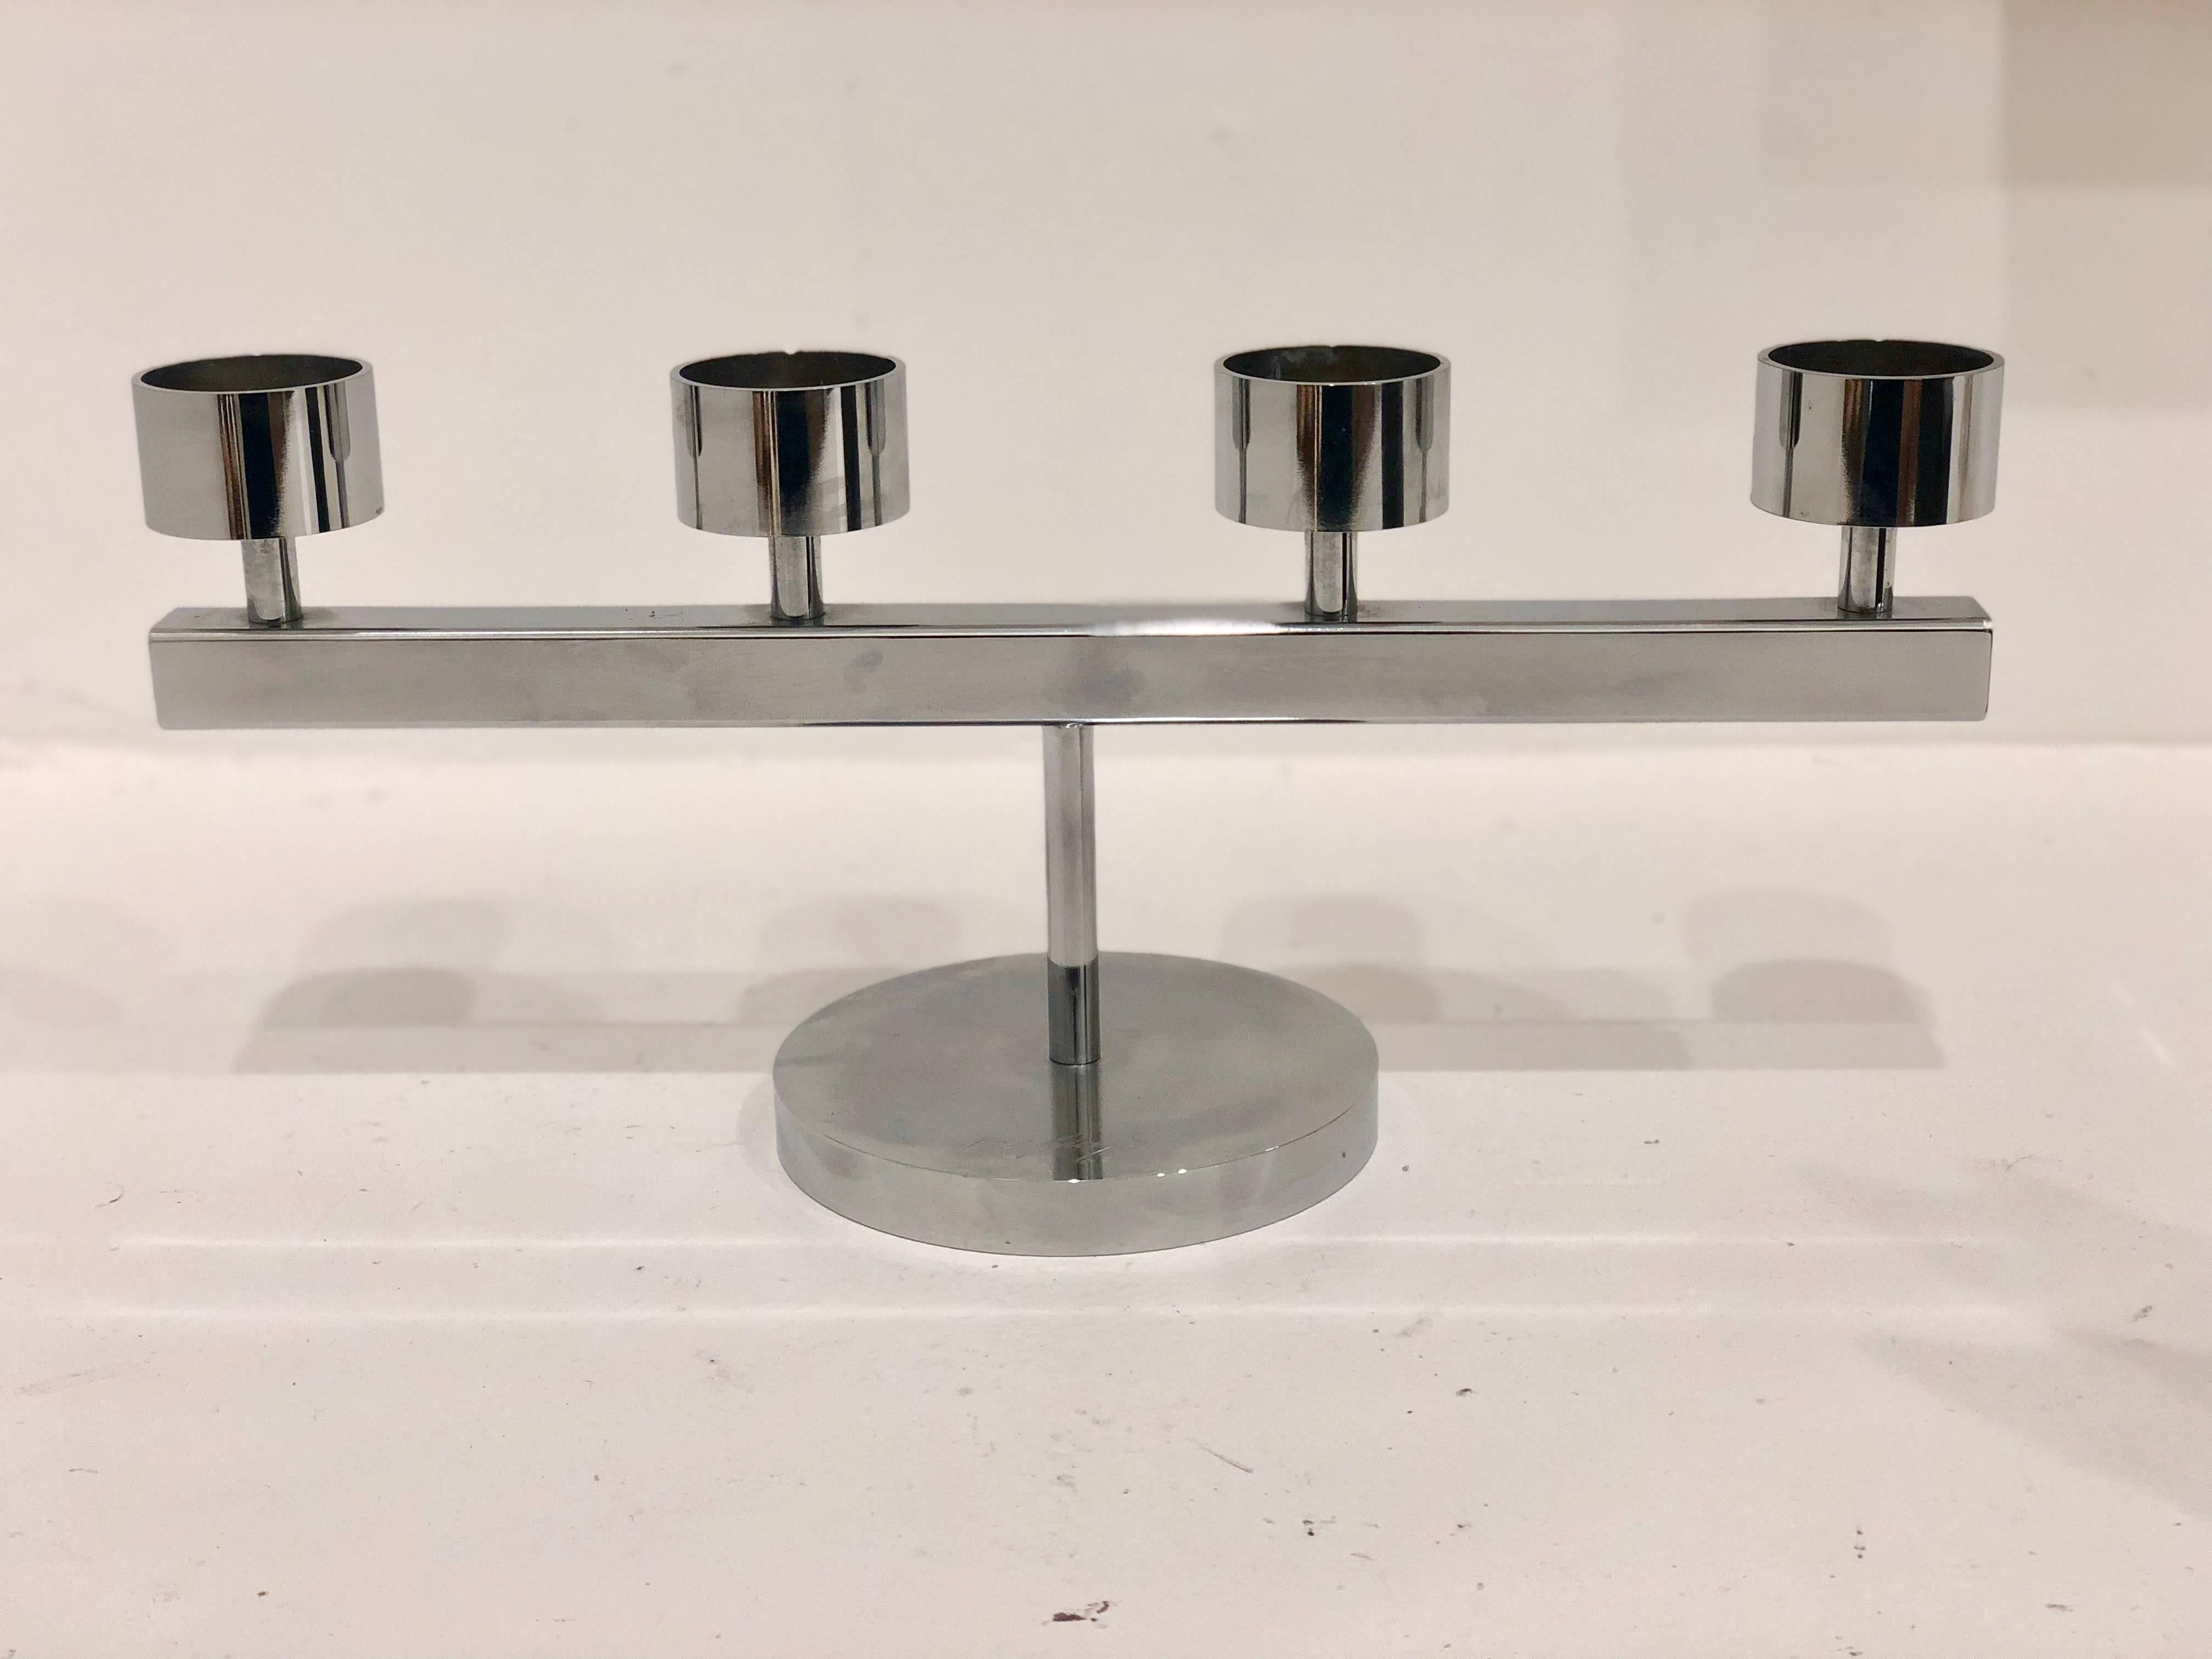 The attention to detail is reflected in the high quality workmanship of this piece, Its been sanded, polished and finished by hand. Beautiful design on this candelabra piece of solid polished chrome-plated steel. Signed on the base. With 1 1/2